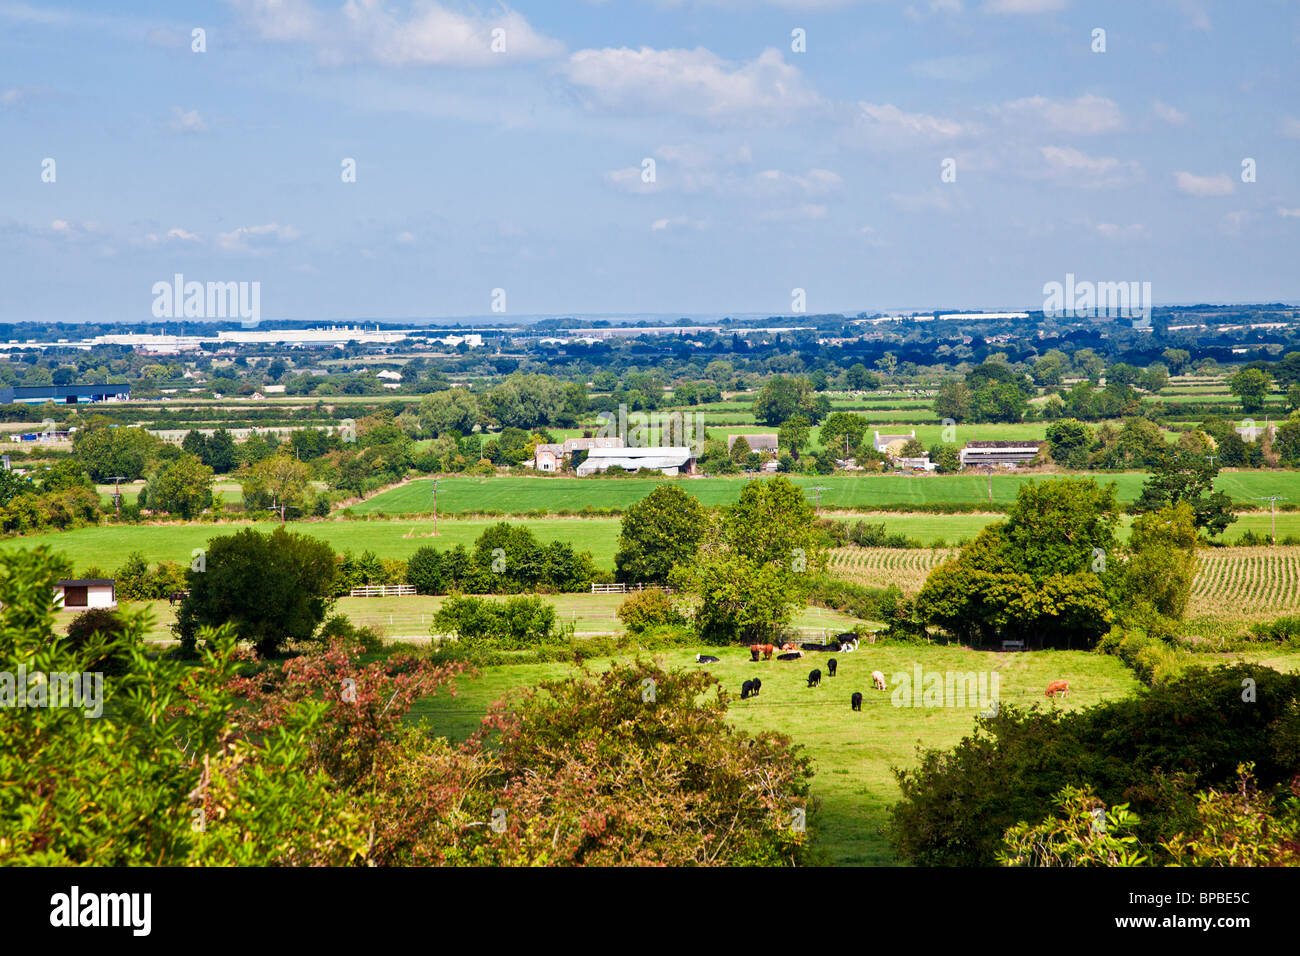 View from Upper Wanborough towards Swindon in Wiltshire, England, UK Stock Photo